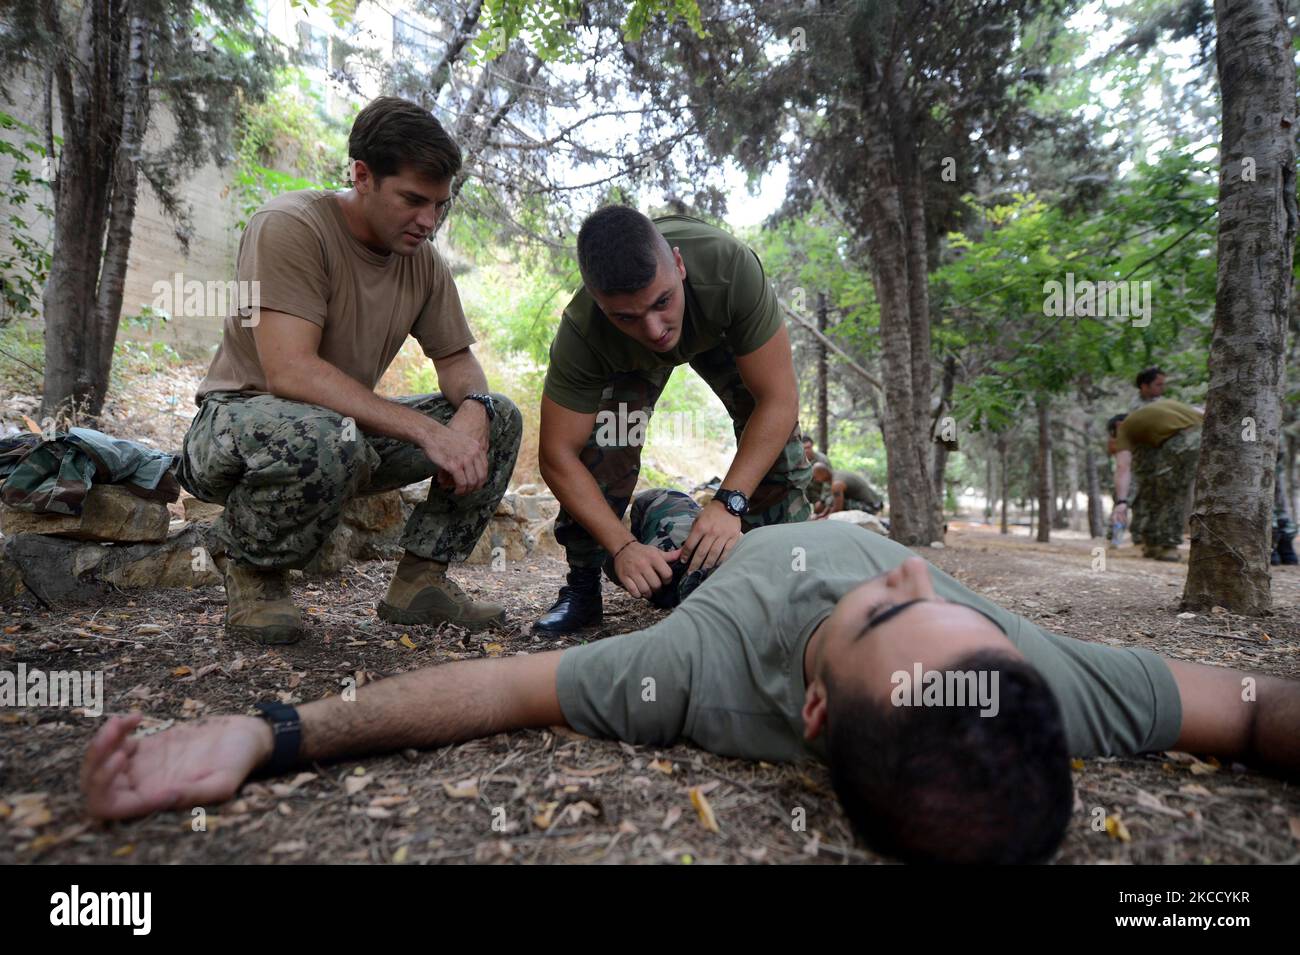 U.S. Soldiers participate in medical training. Stock Photo